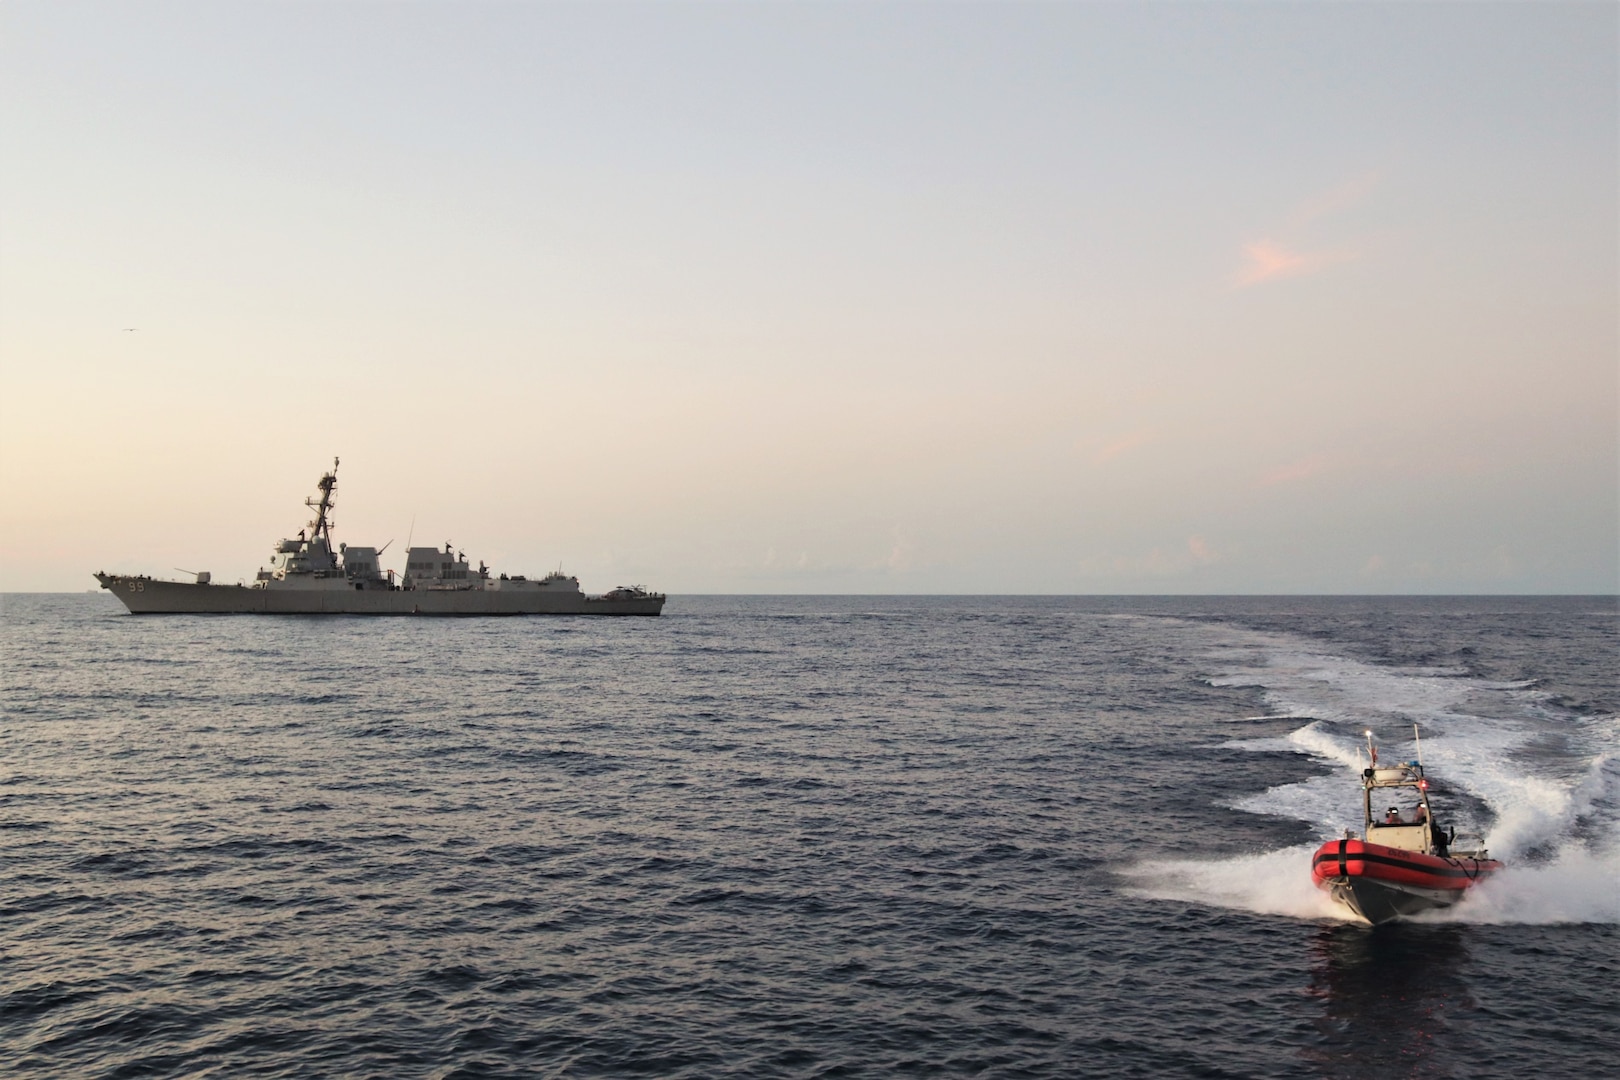 U.S. Coast Guard Cutter Vigilant (WMEC-617) conducts a joint operation with the USS Farragut (DDG-99) to interdict a drug smuggling vessel, Oct. 15, 2023, in the Caribbean Sea. During the patrol, Vigilant’s crew disrupted illegal narcotics smuggling, interdicting more than 5,600 pounds of illicit drugs.